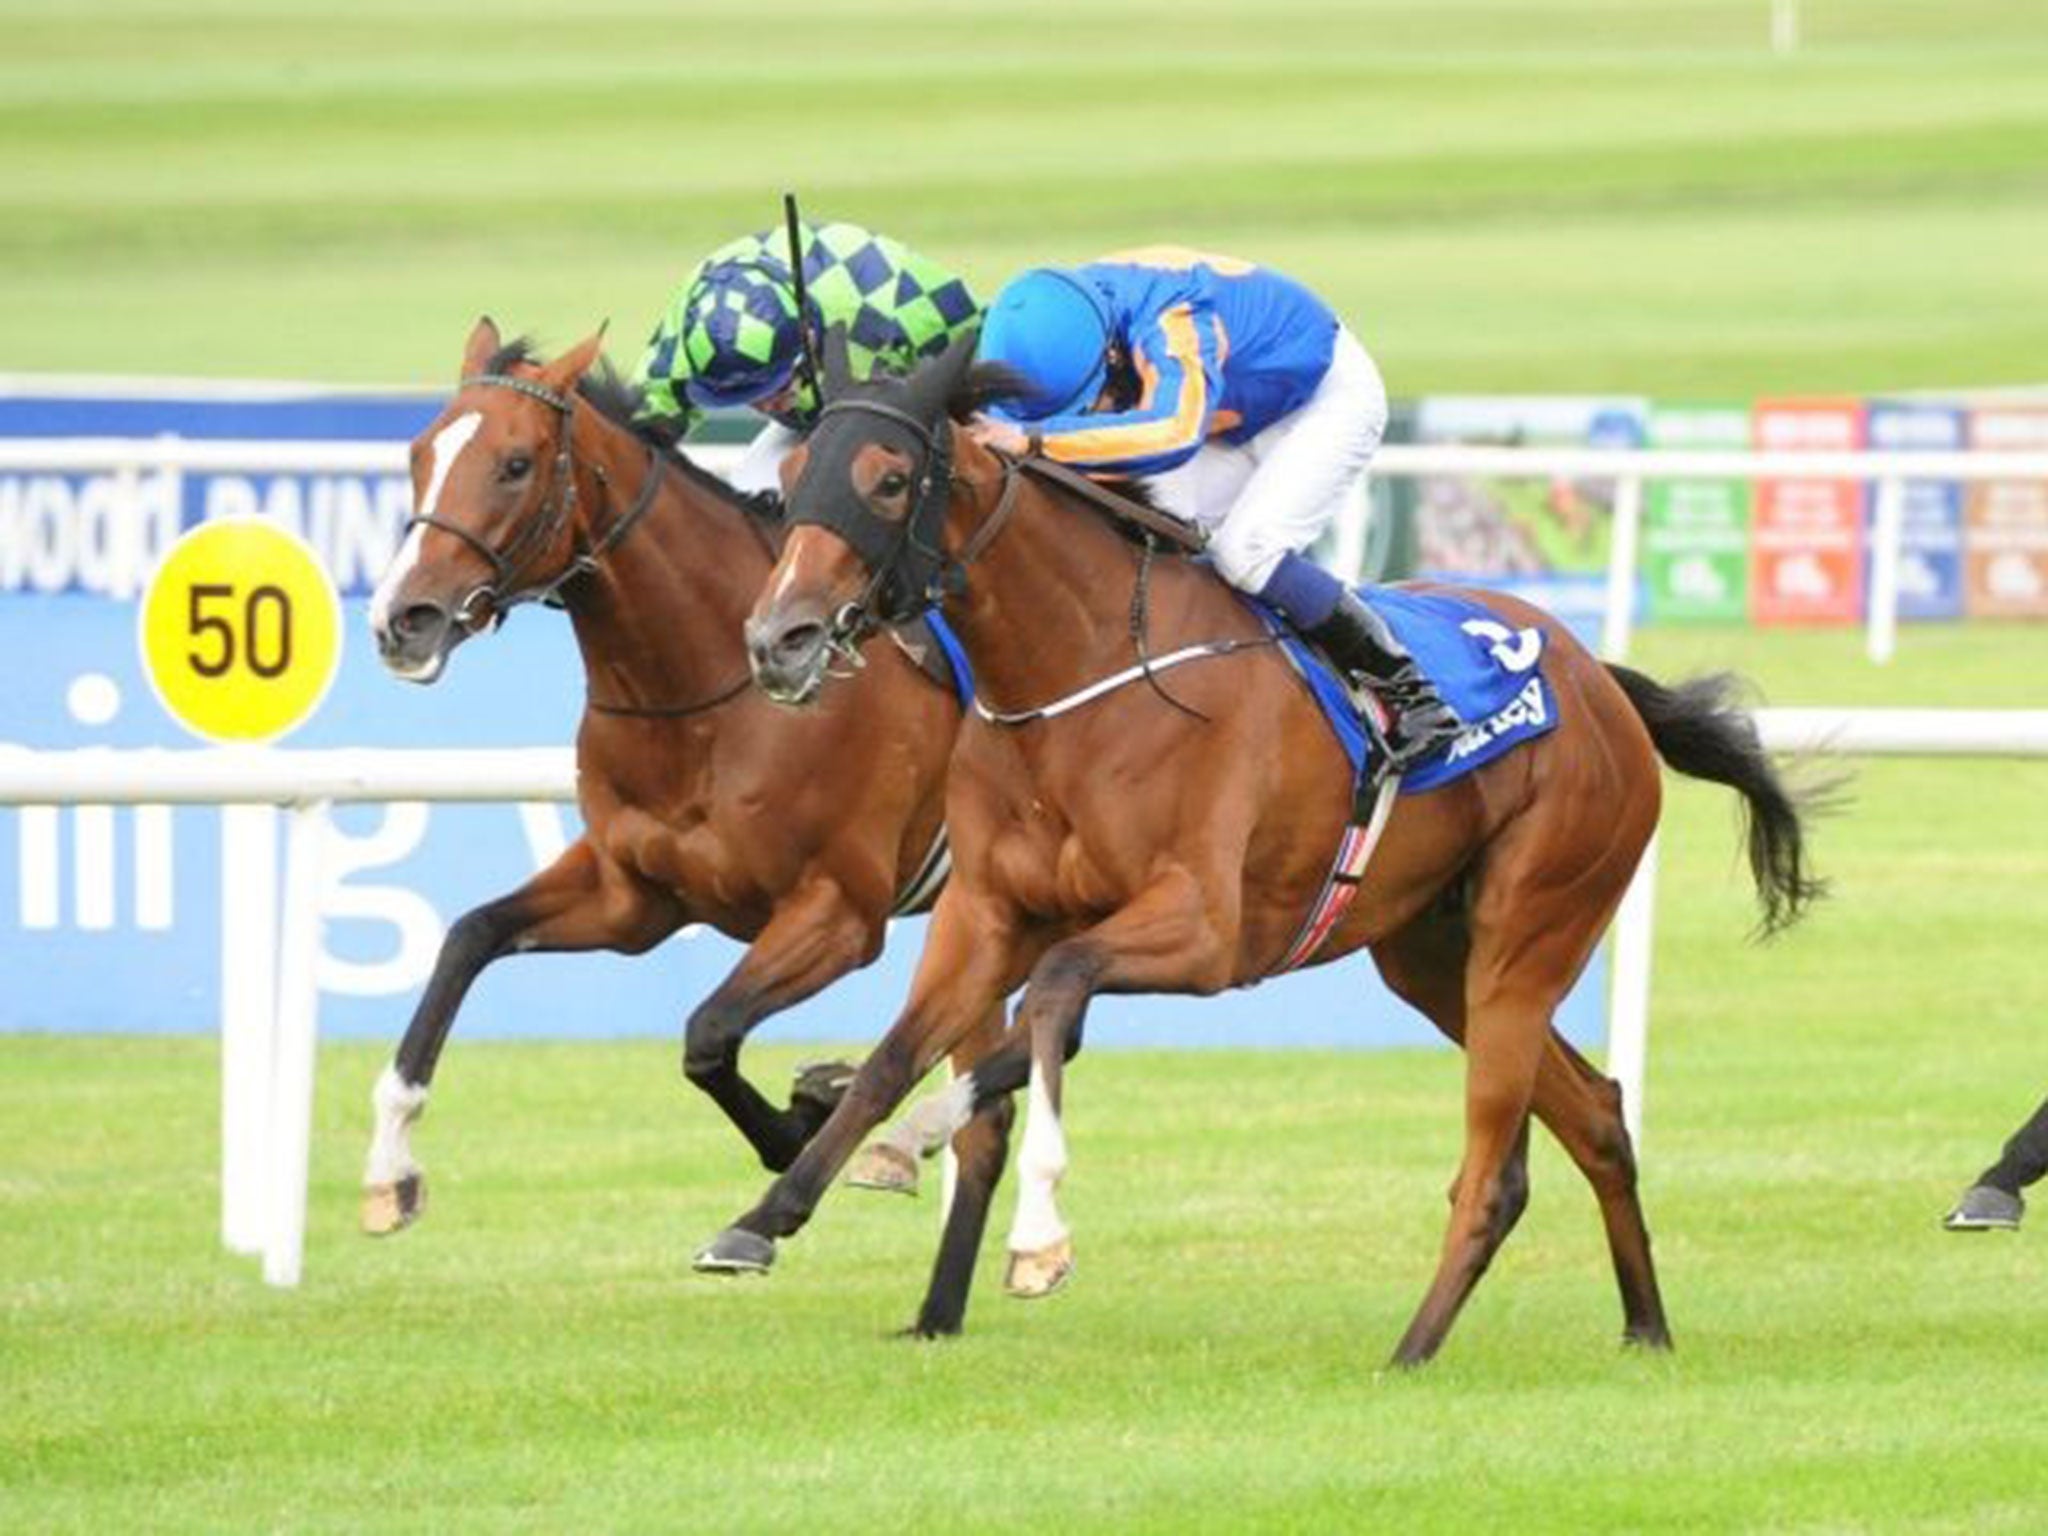 Hard ridden: Colm O’Donoghue drives Bracelet (right) to victory in the Irish Oaks, beating Volume into third place